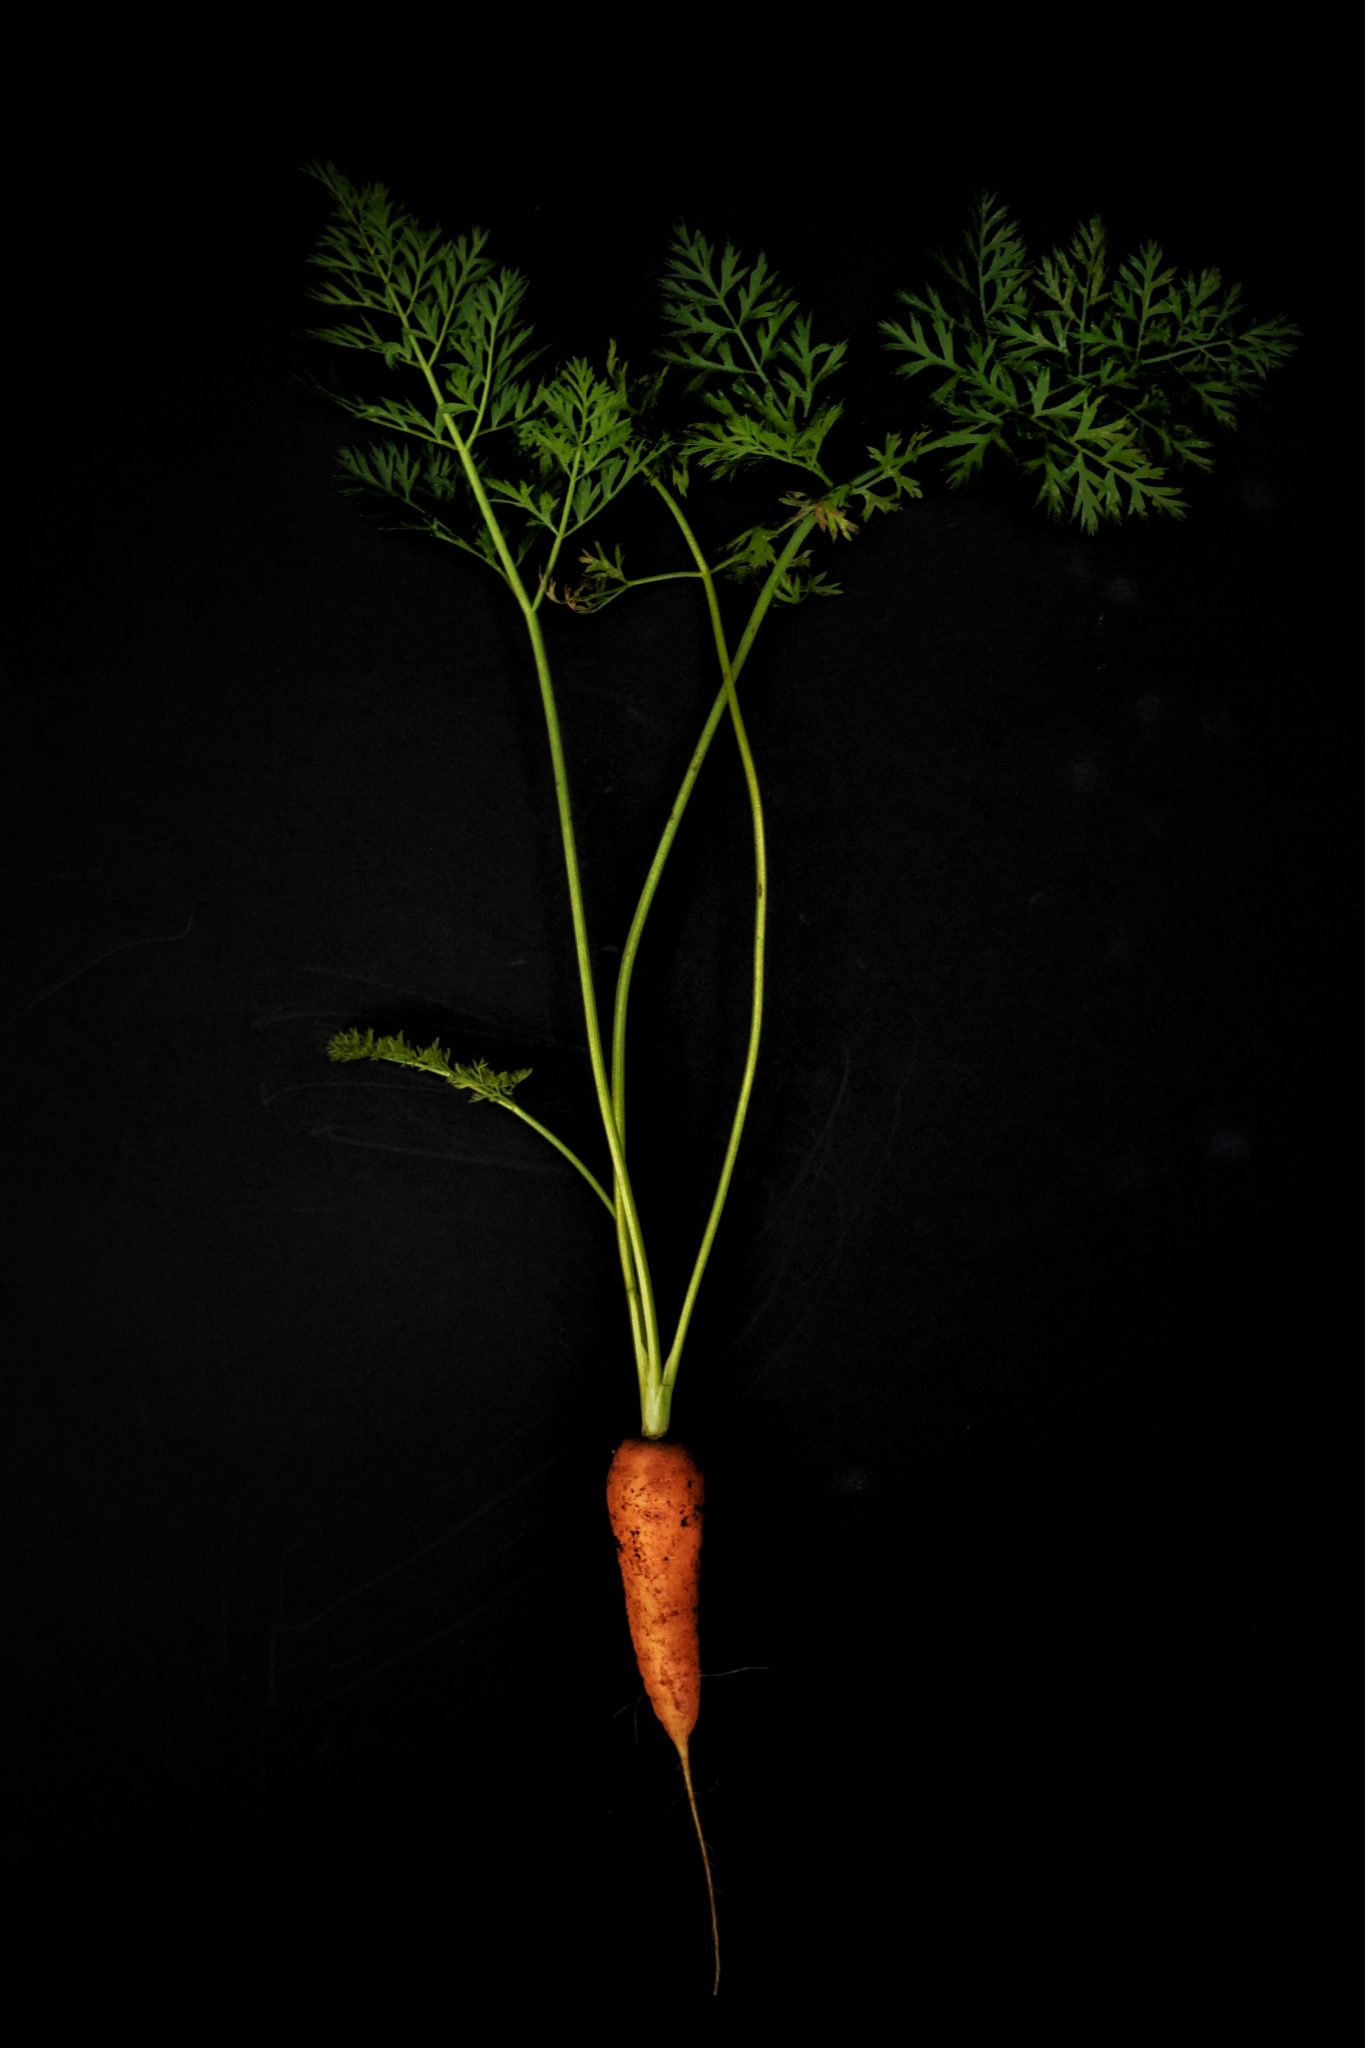 a picture of a carrot with a small fruit and long green leaf stalks on a black background